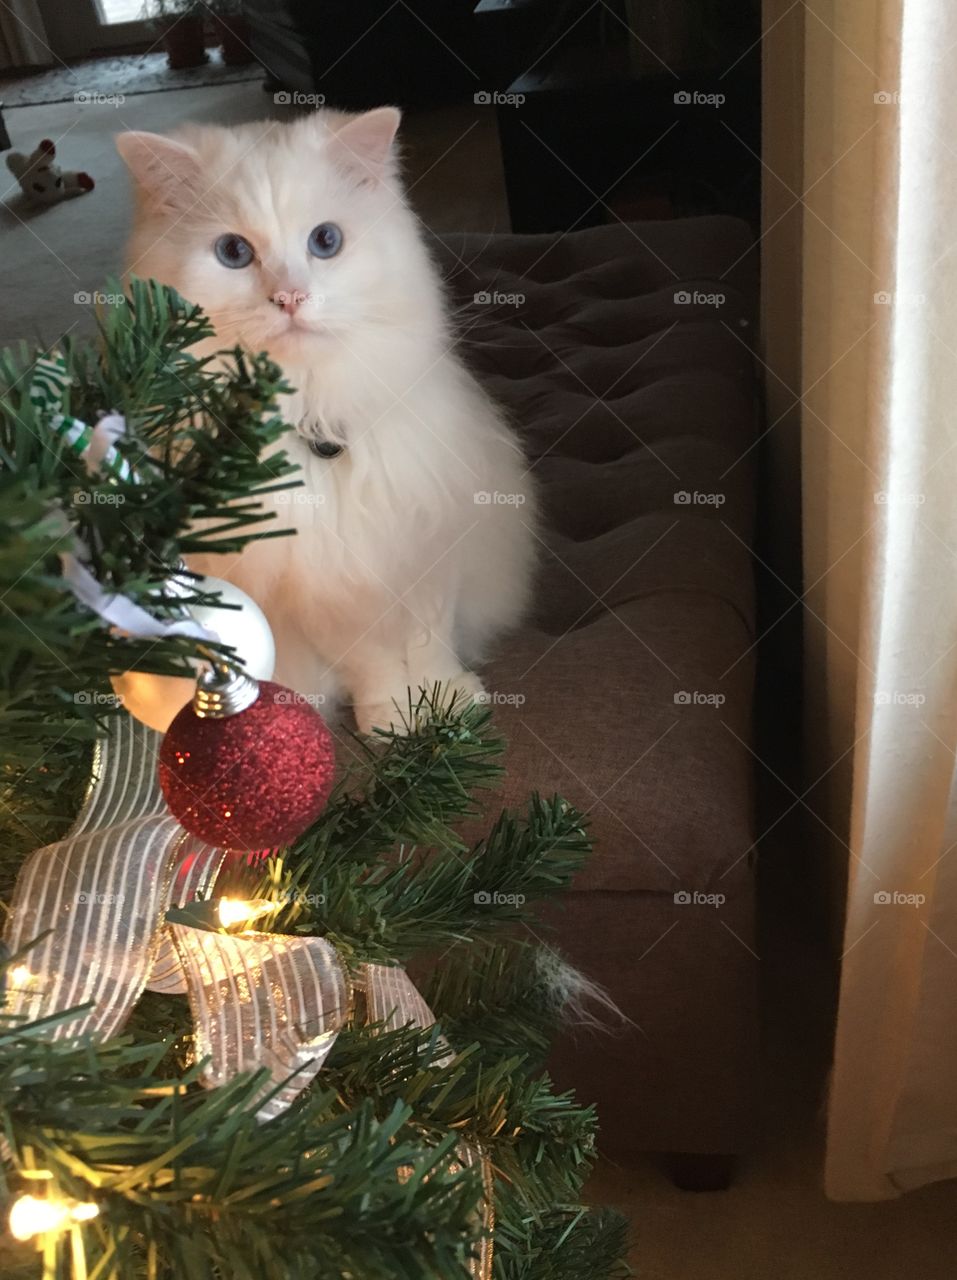 George and his tree